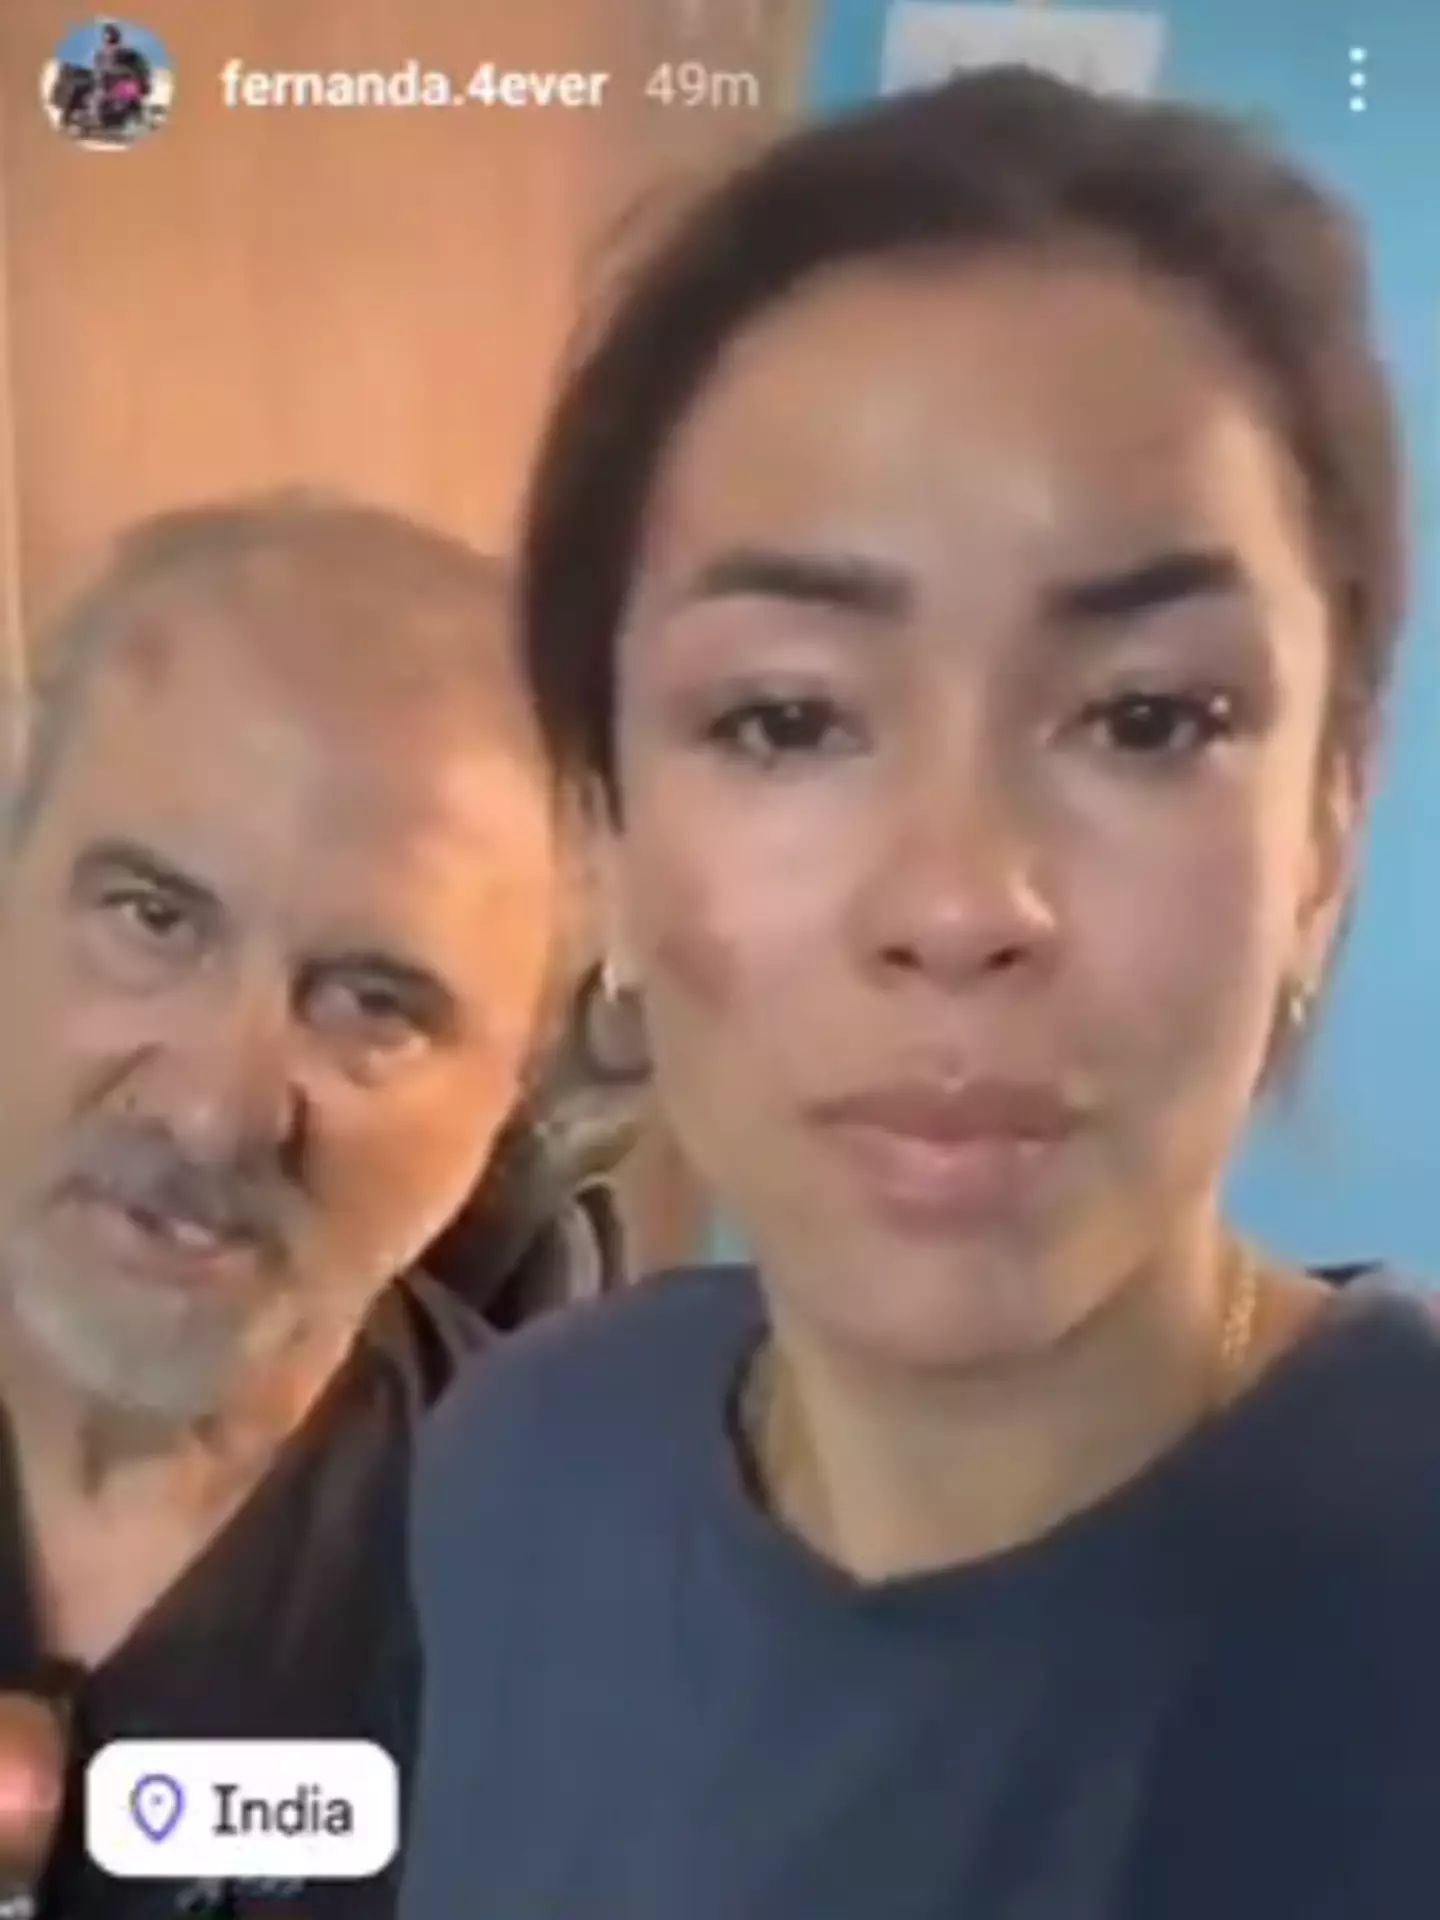 The couple shared a video on social media explaining what happened to them.